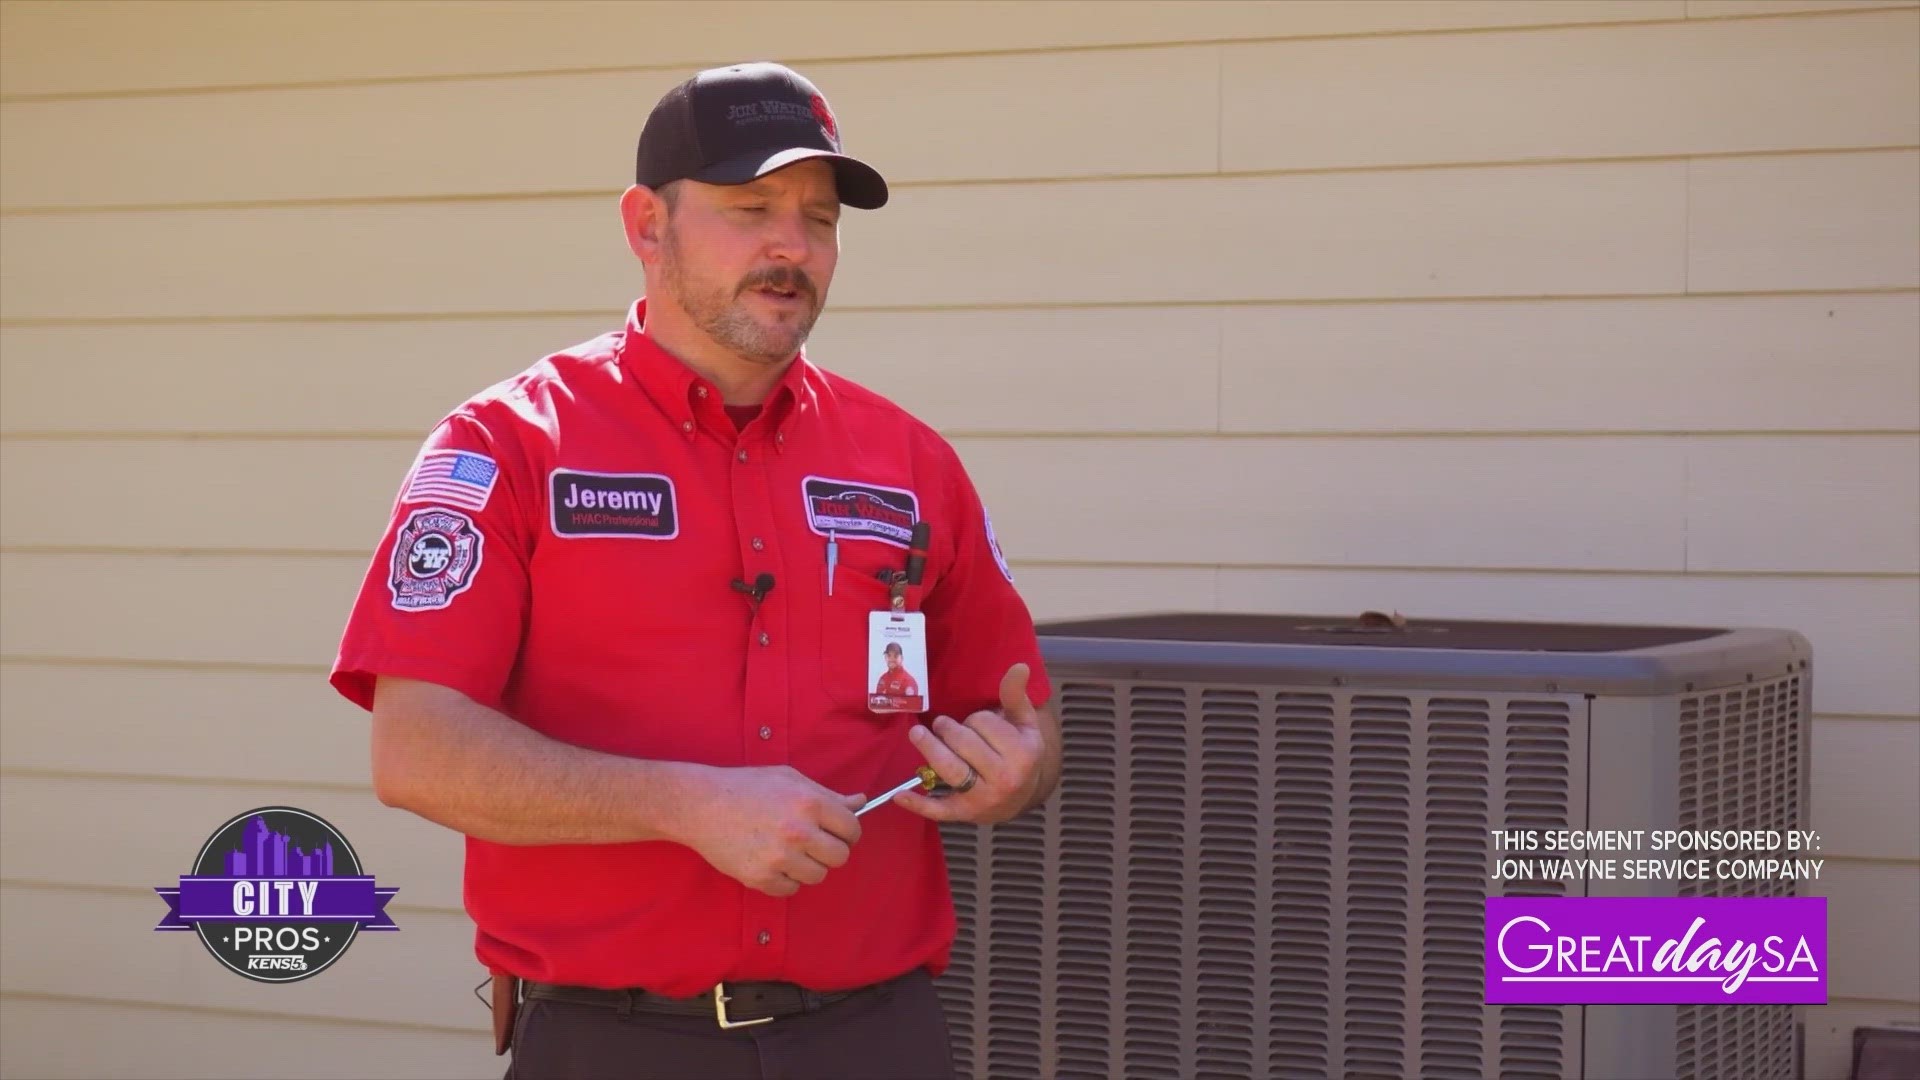 Update & tune-up your A/C unit. [Sponsored by Jon Wayne Service Company]